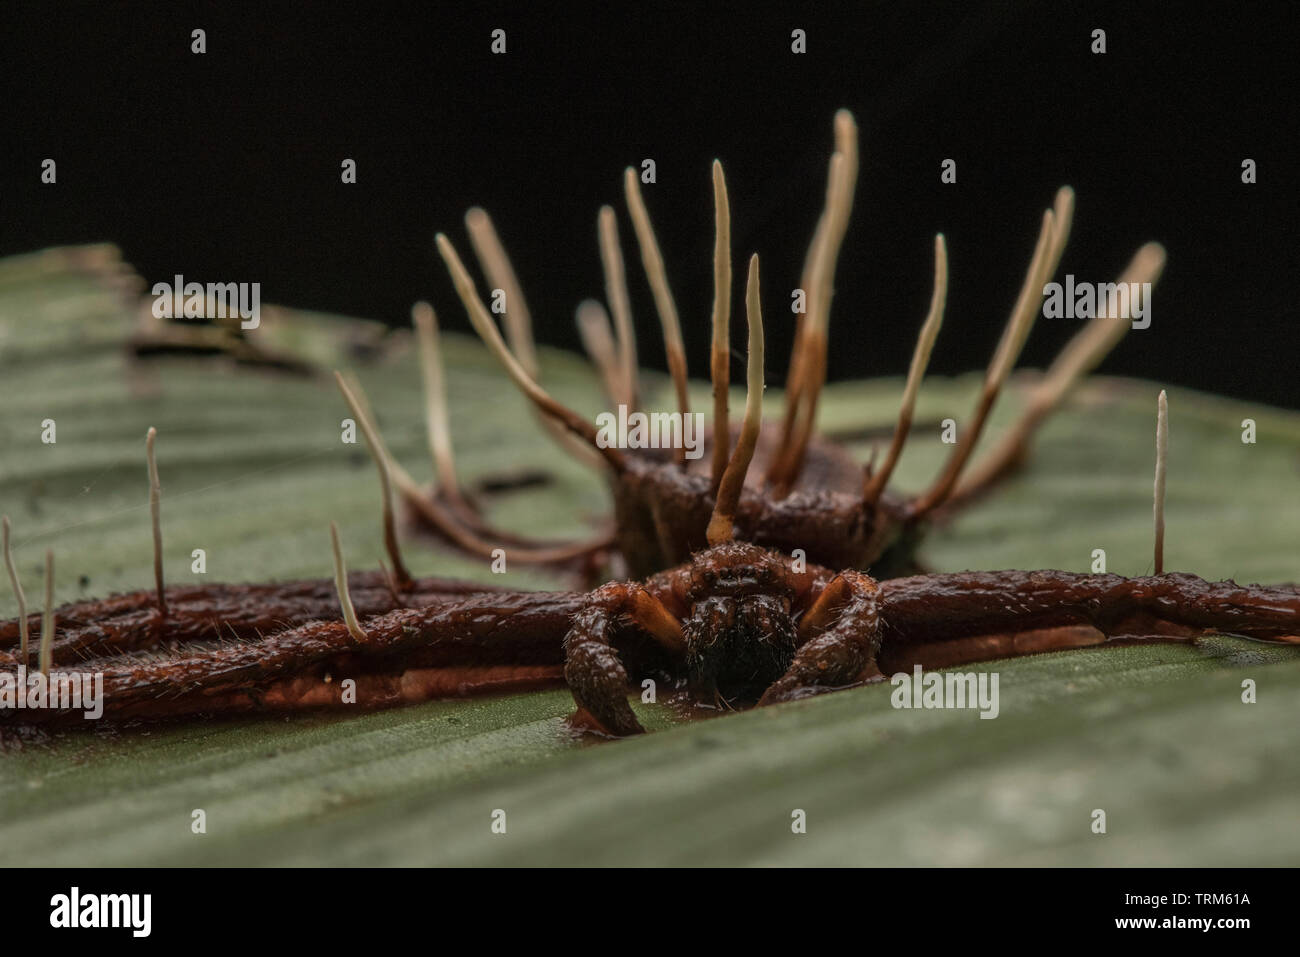 A spider which has been killed by an entomopathogenic fungus, perhaps a cordyceps or ophiocordyceps species. Stock Photo